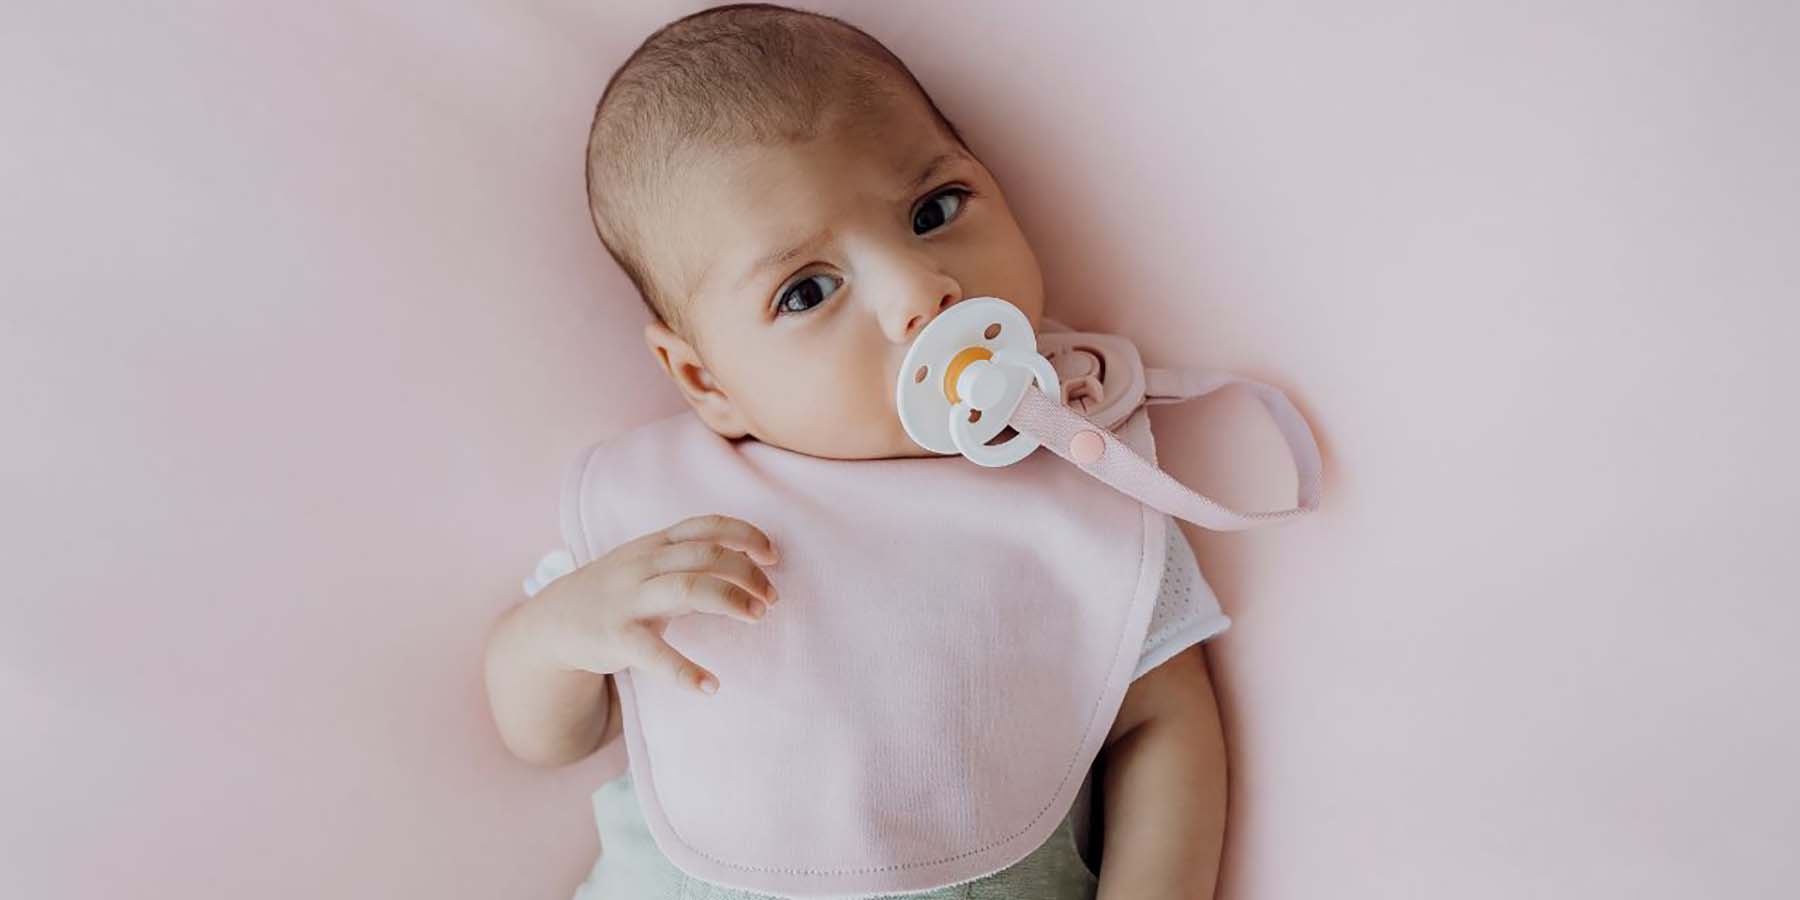 A baby wearing a pink Gigi Bib. The baby has a dummy in his mouth, secured to the bib with the Gigi Accessory Tether